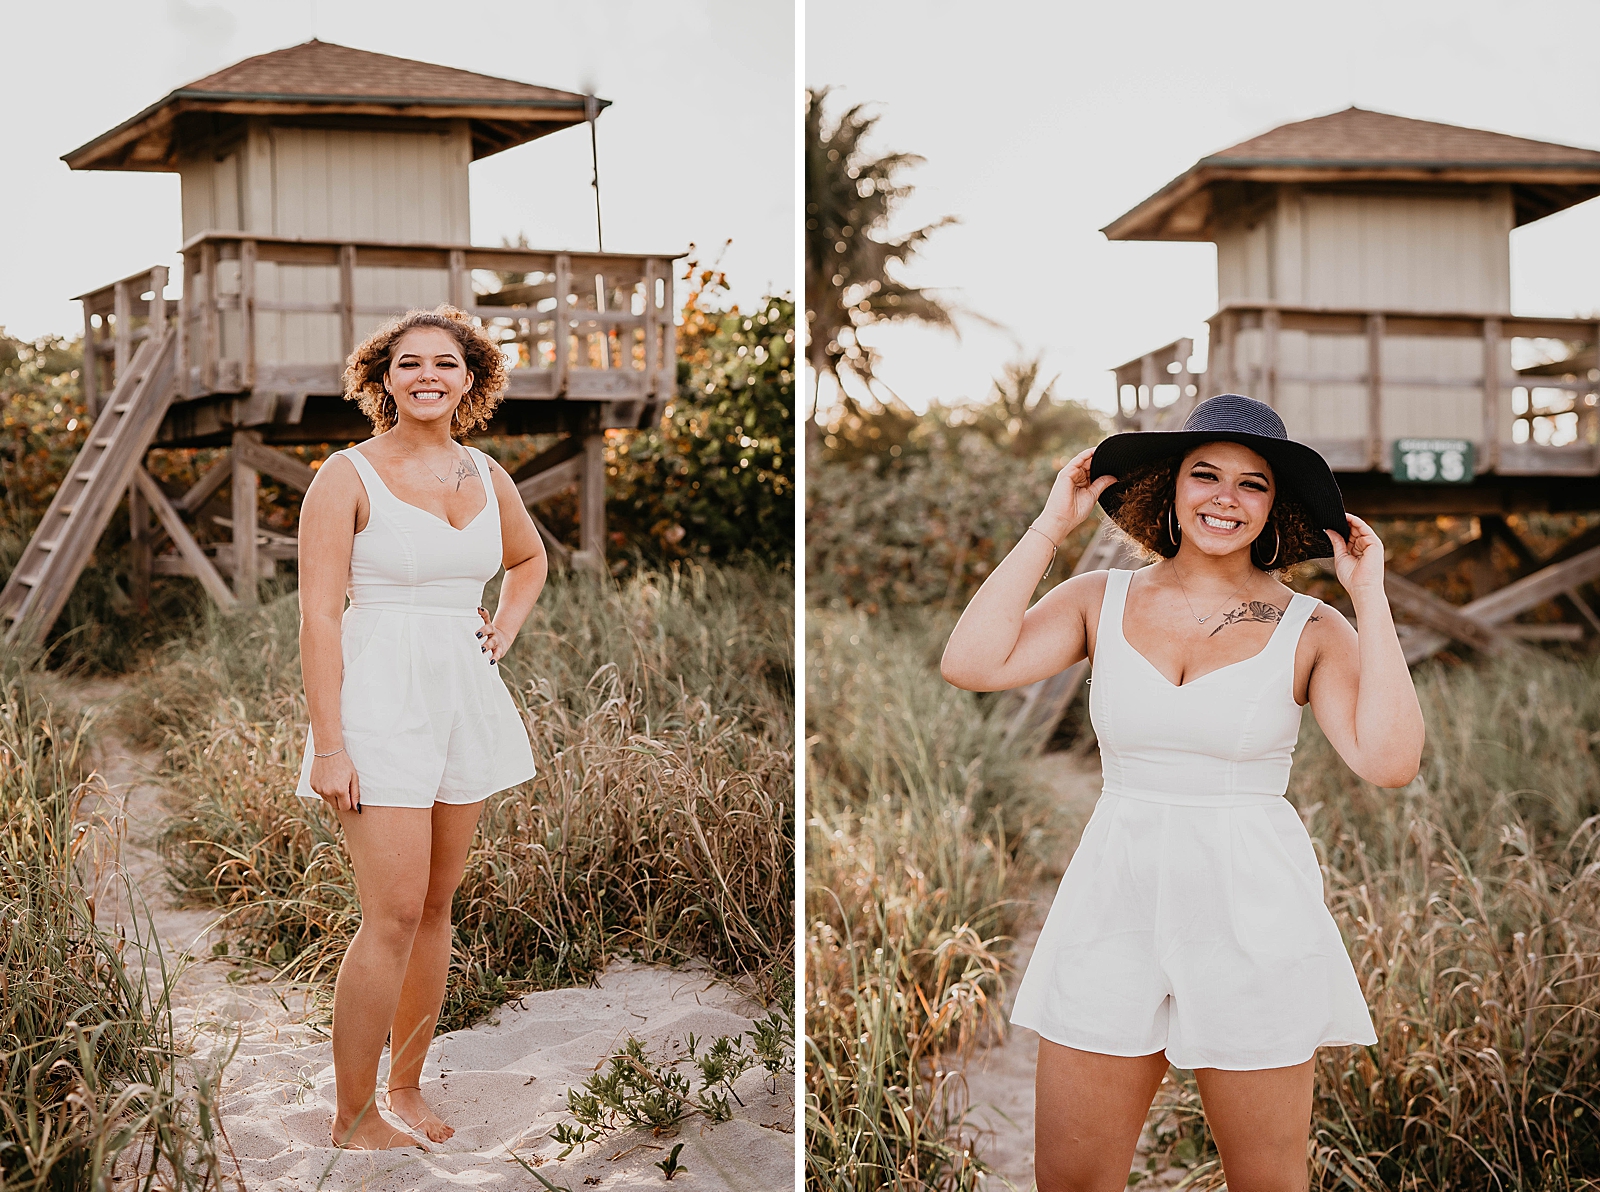 Woman posing in front of lifeguard house with hat